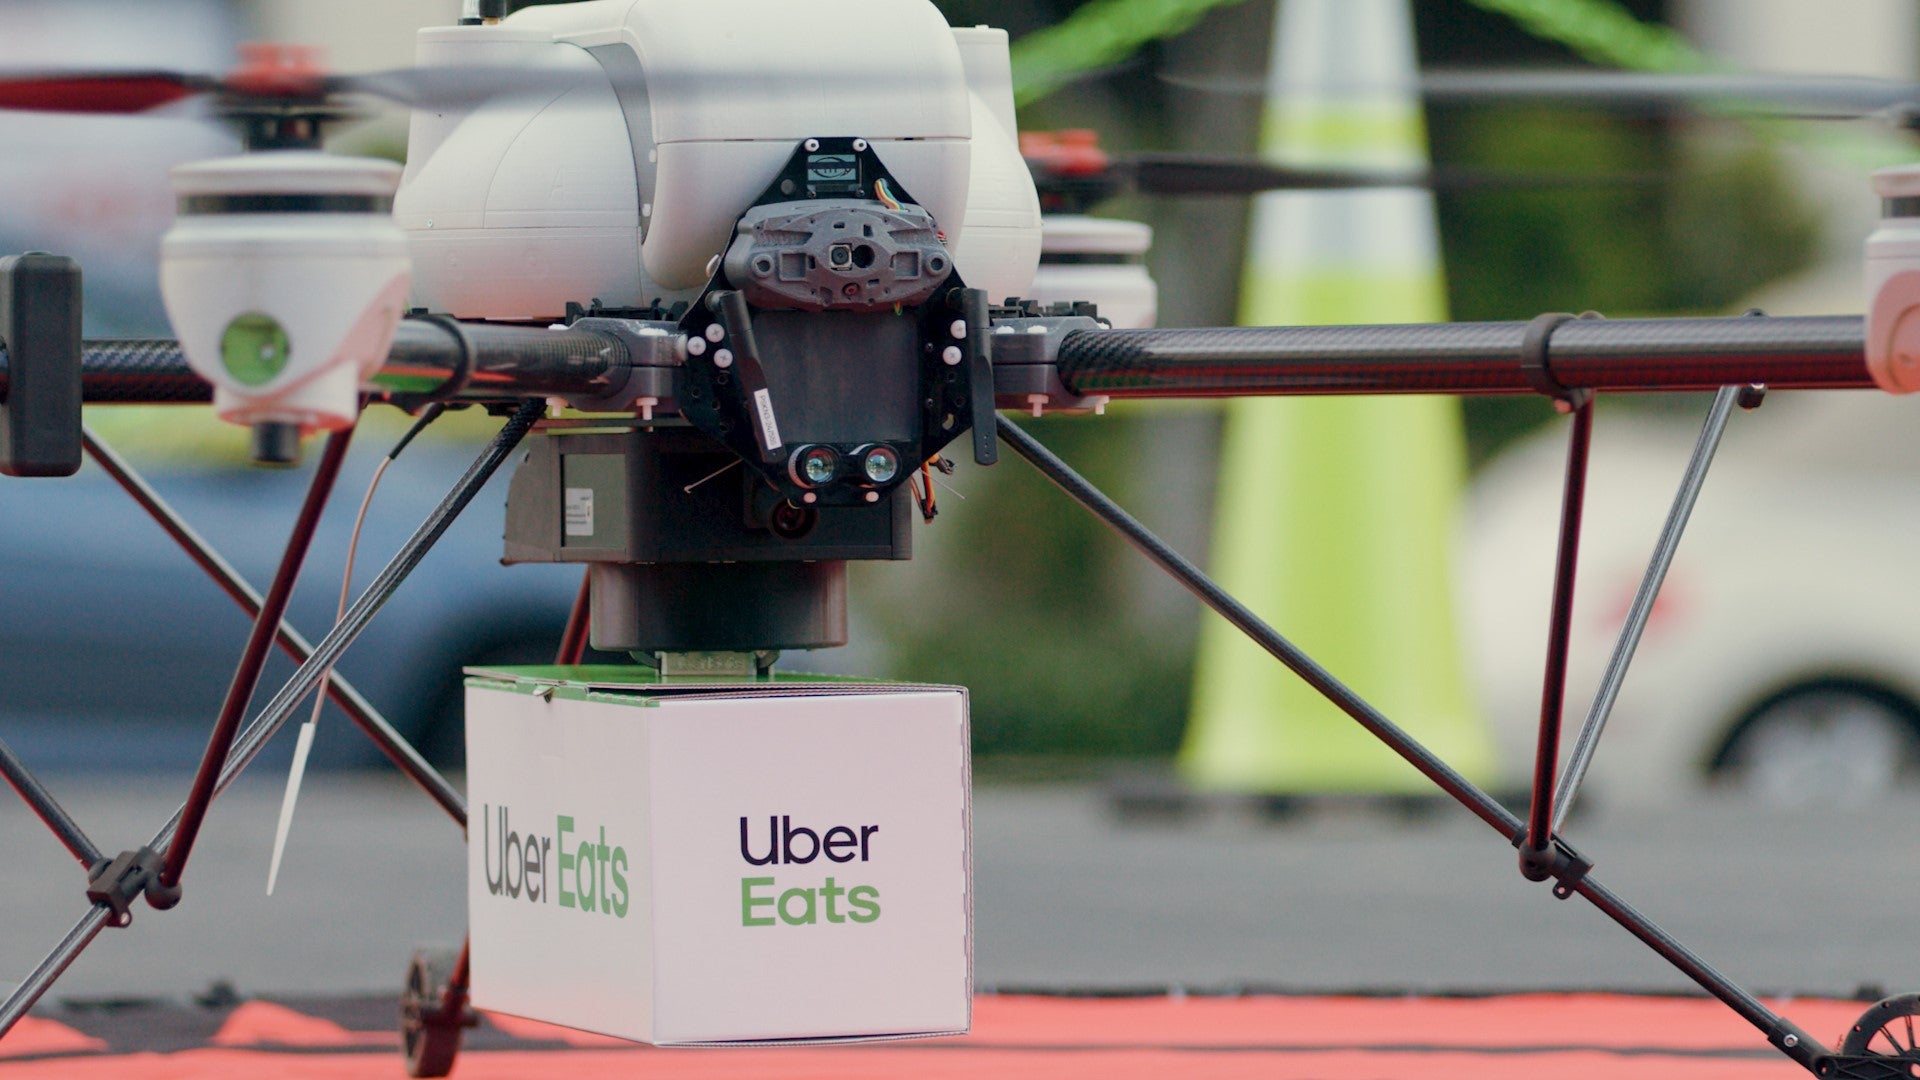 VOXL from ModalAI Contributes to Uber Eats Drone Delivery Testing